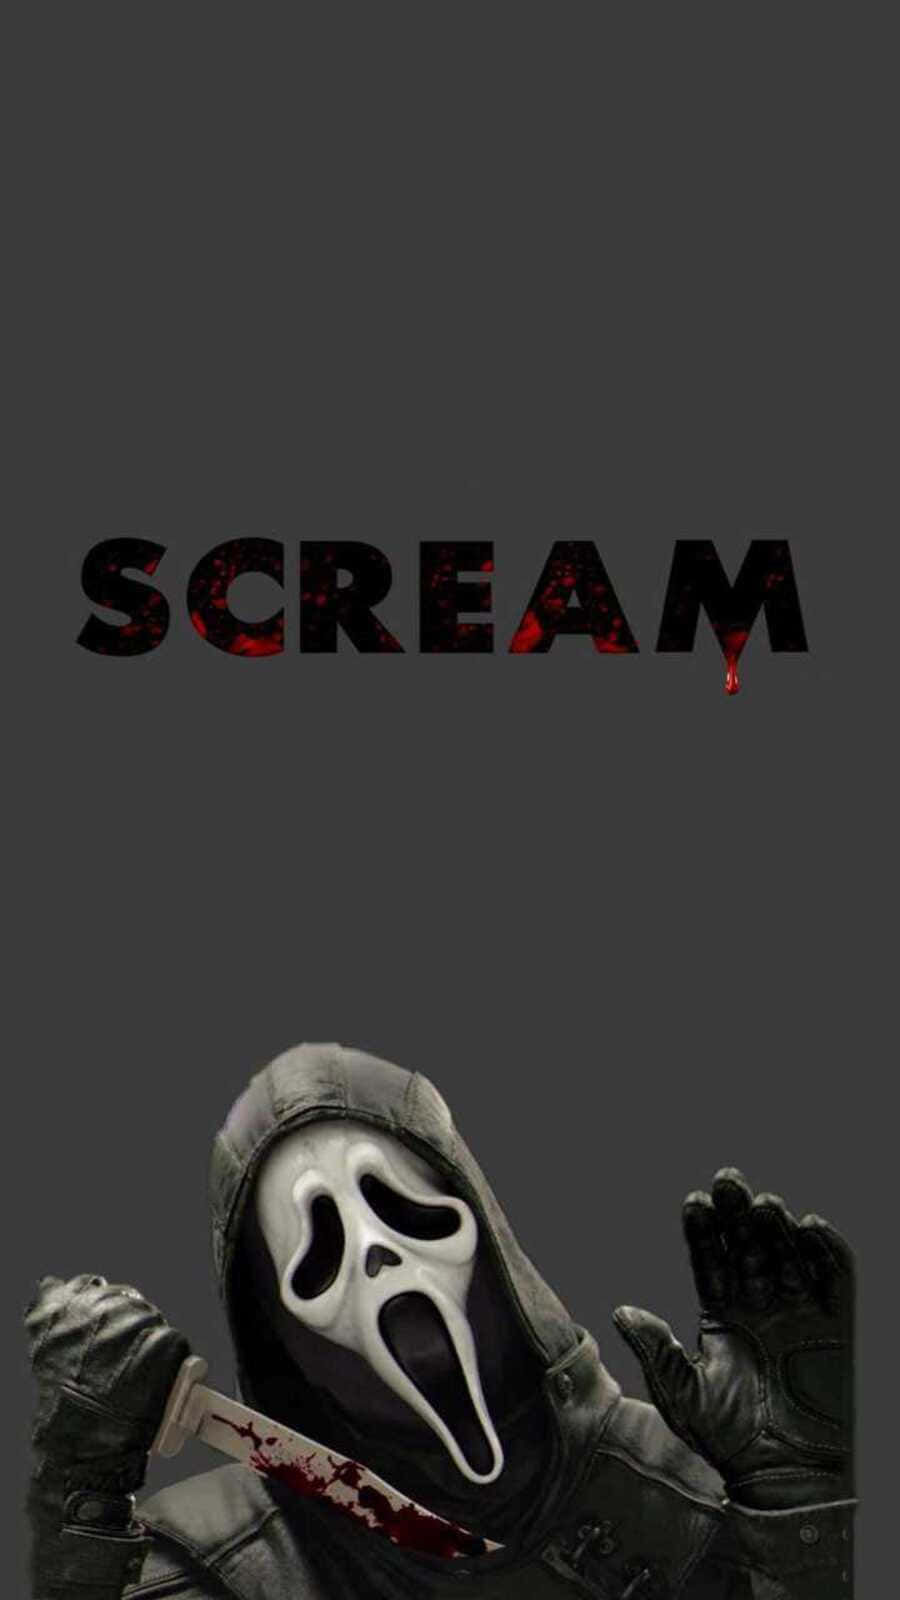 Mysterious Ghostface Aesthetic Wallpaper